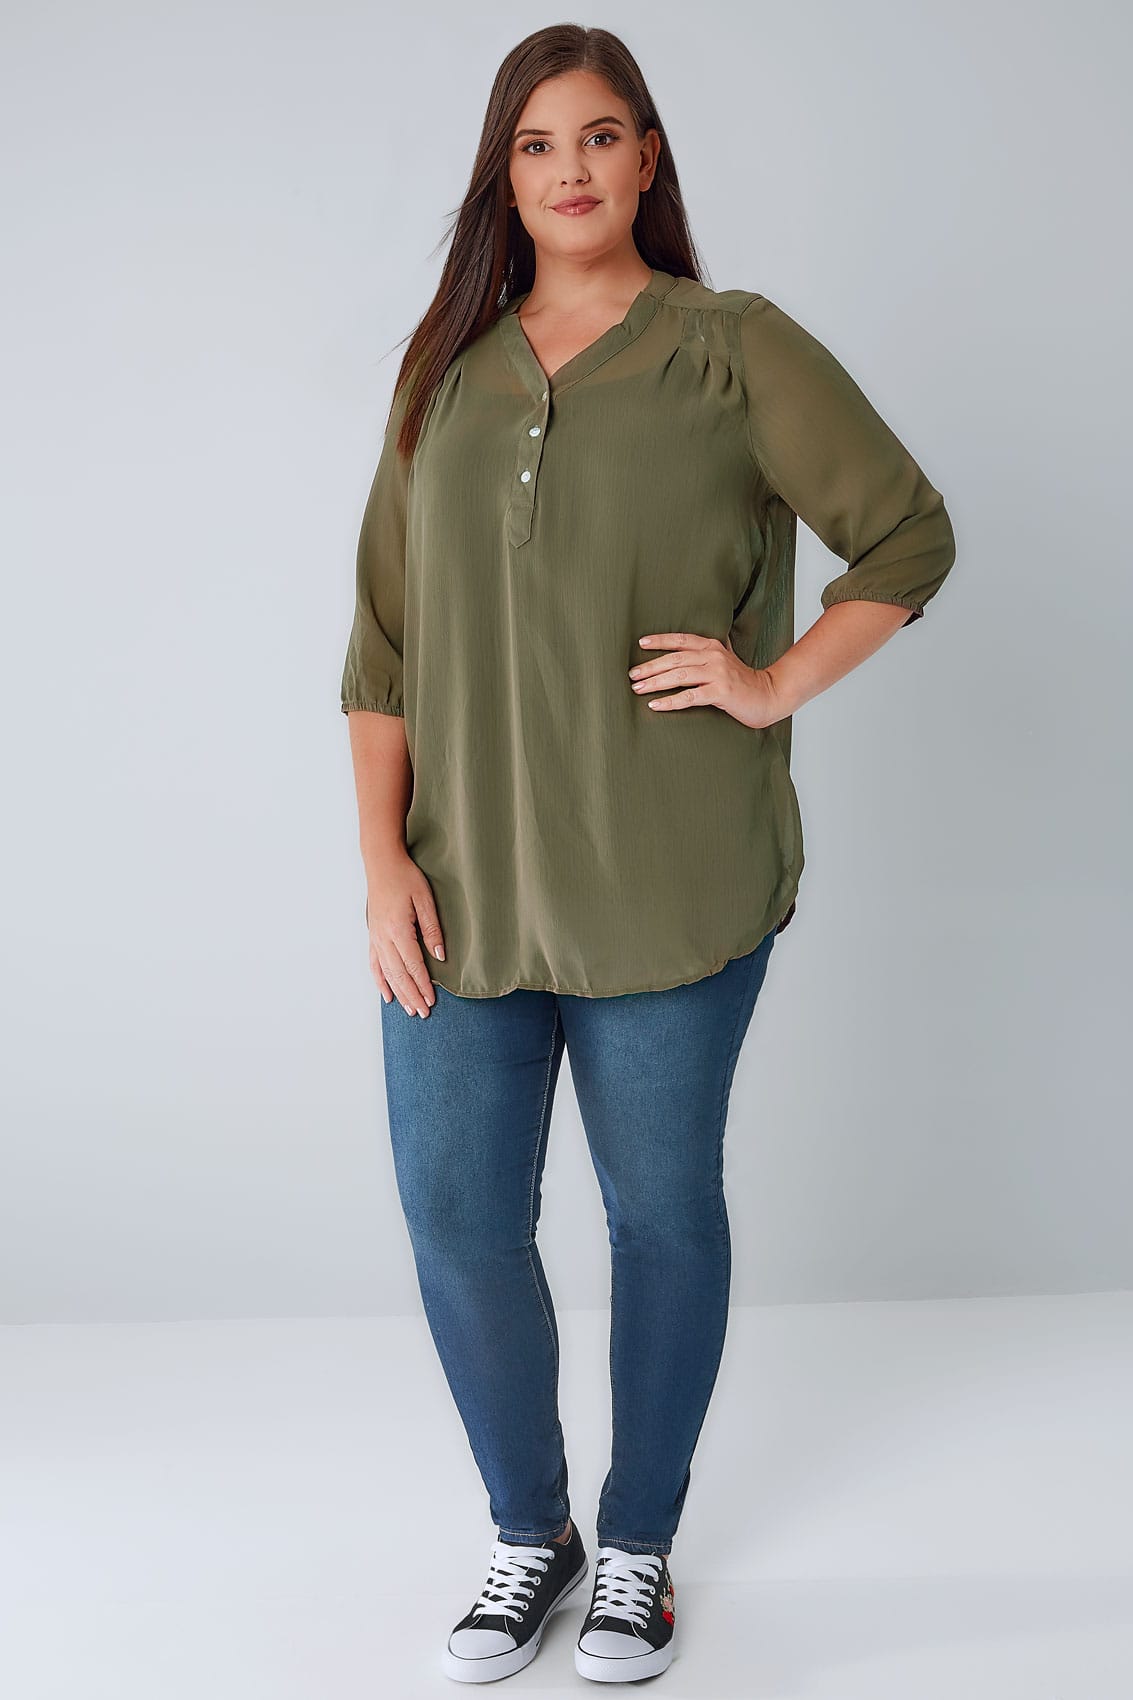 Dark Green Sheer Chiffon Button-Up Blouse With 3/4 Length Sleeves plus ...